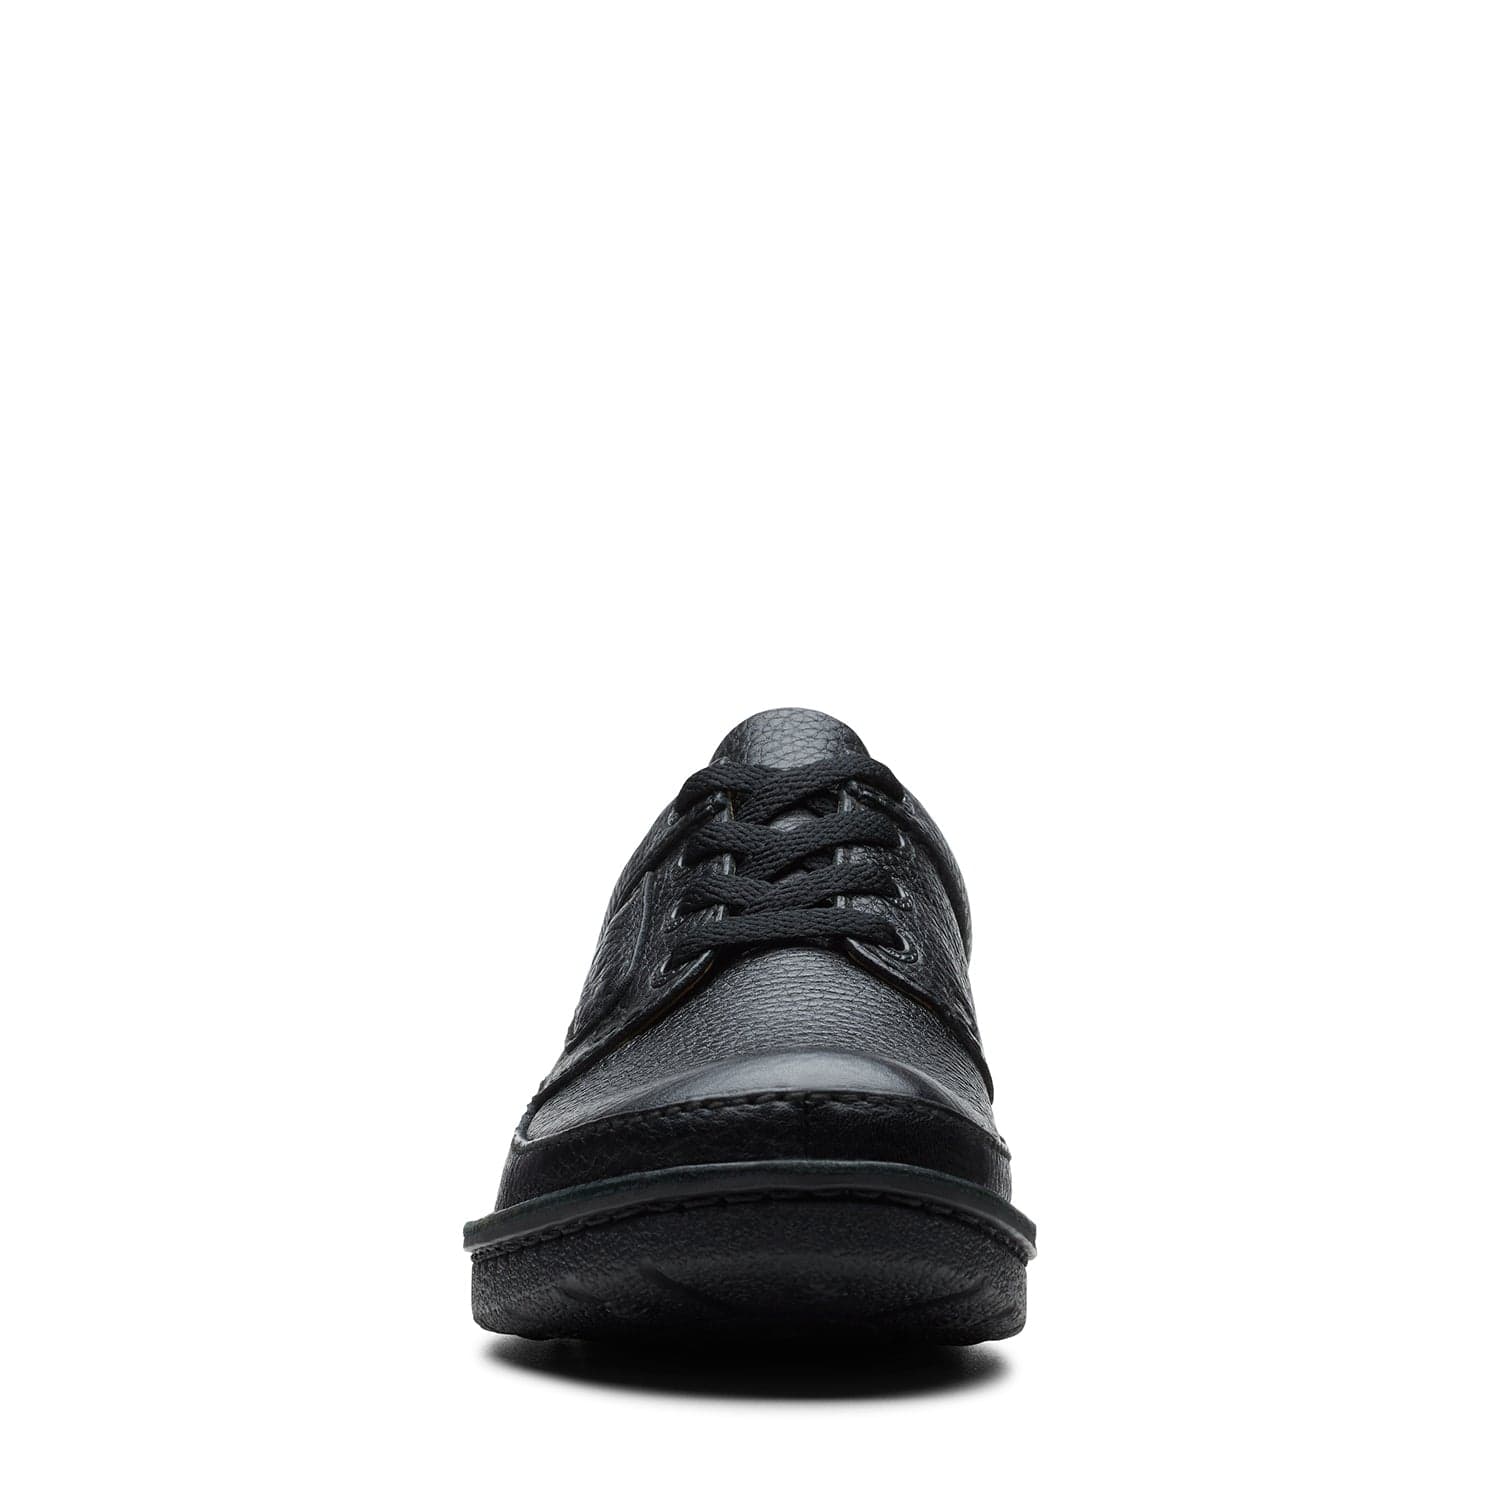 Clarks Nature Ii - Shoes - Black Grained Leather - 261420397 - G Width (Standard Fit)